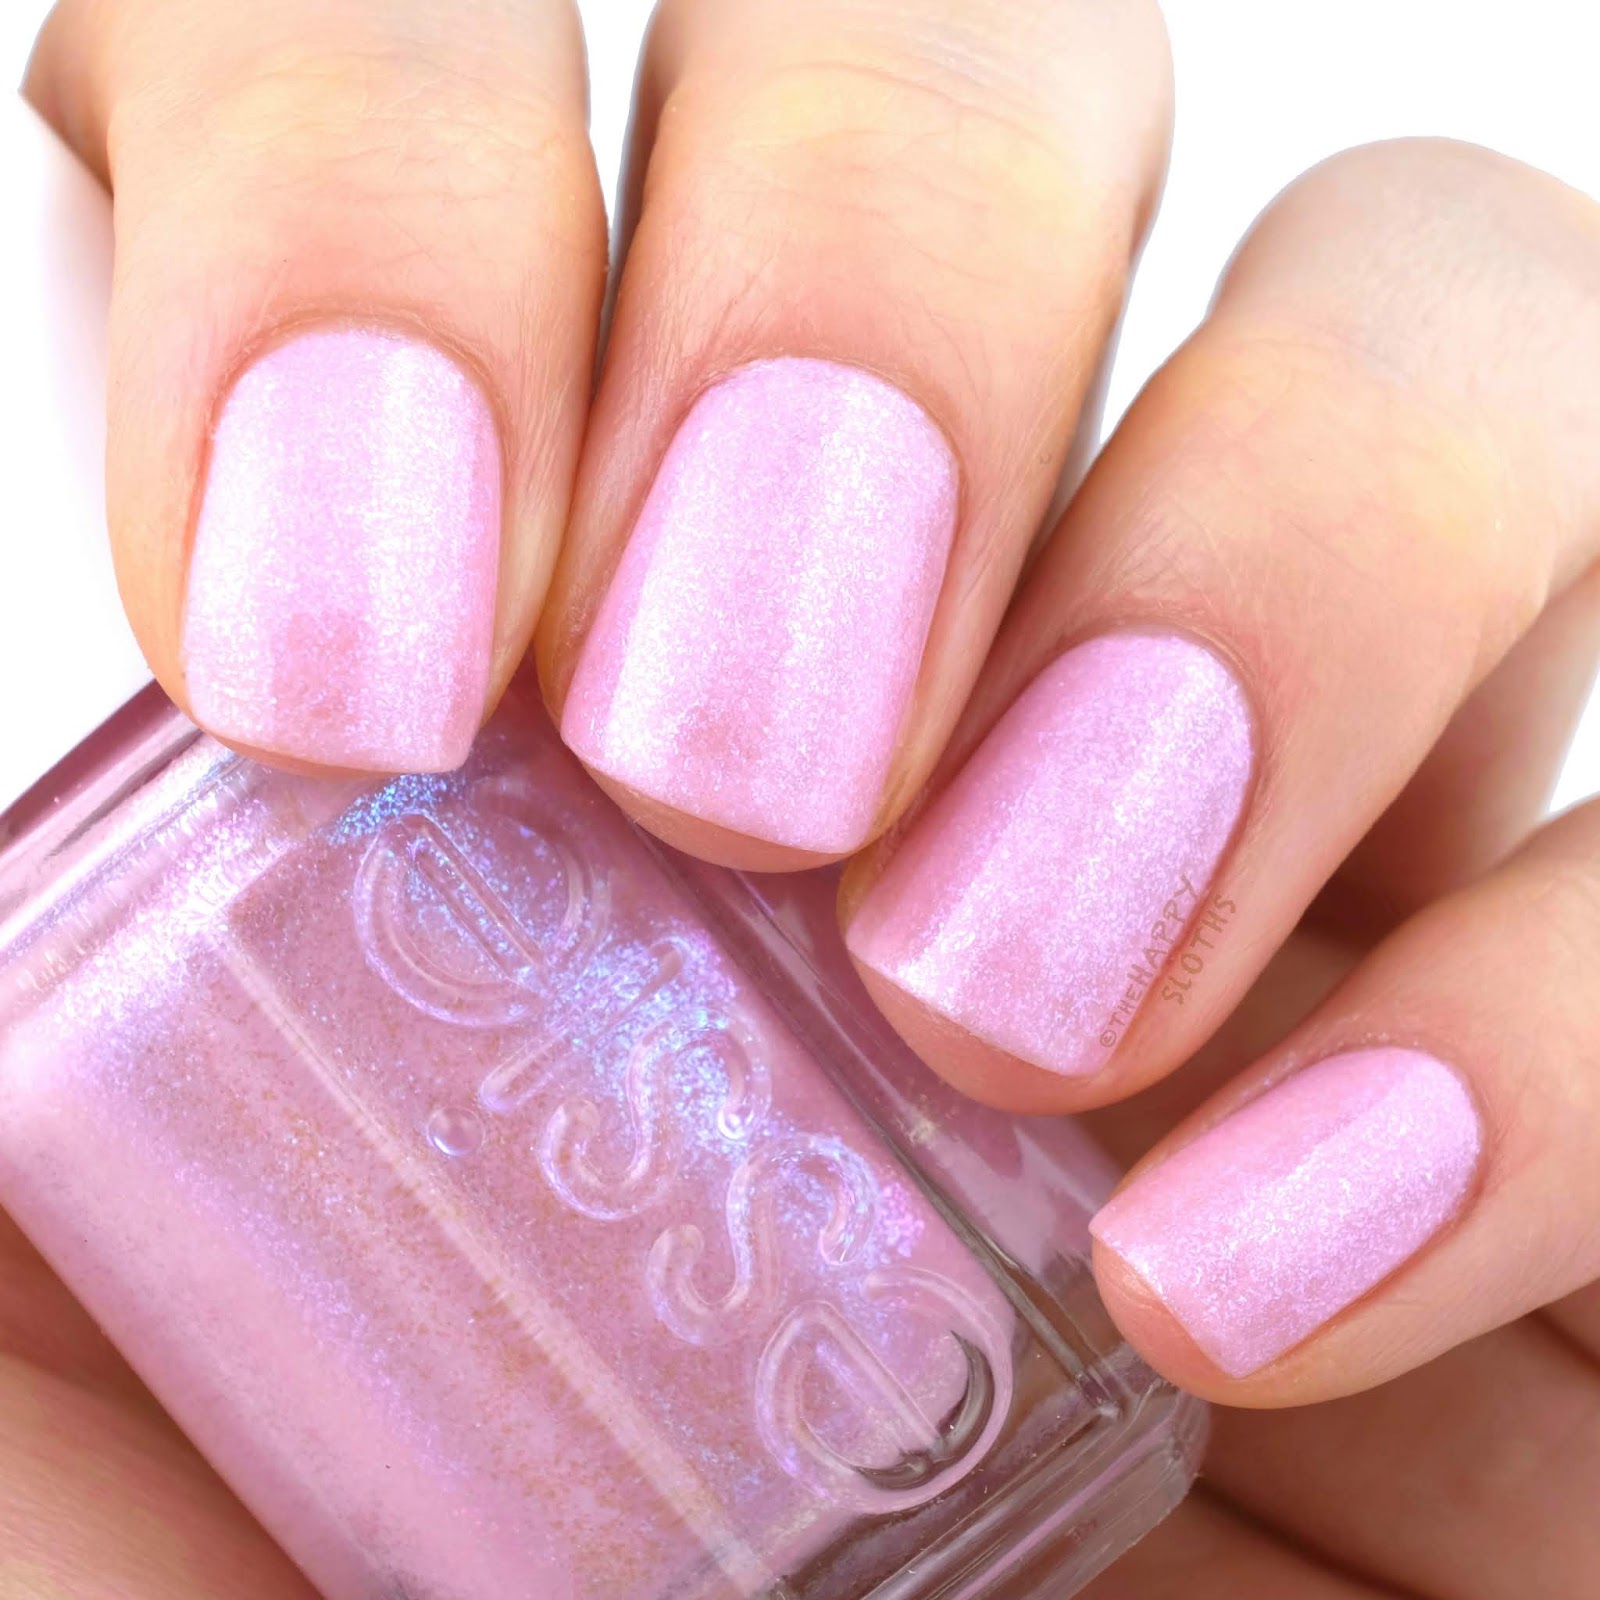 Essie Spring 2020 | Kissed by Mist: Review and Swatches